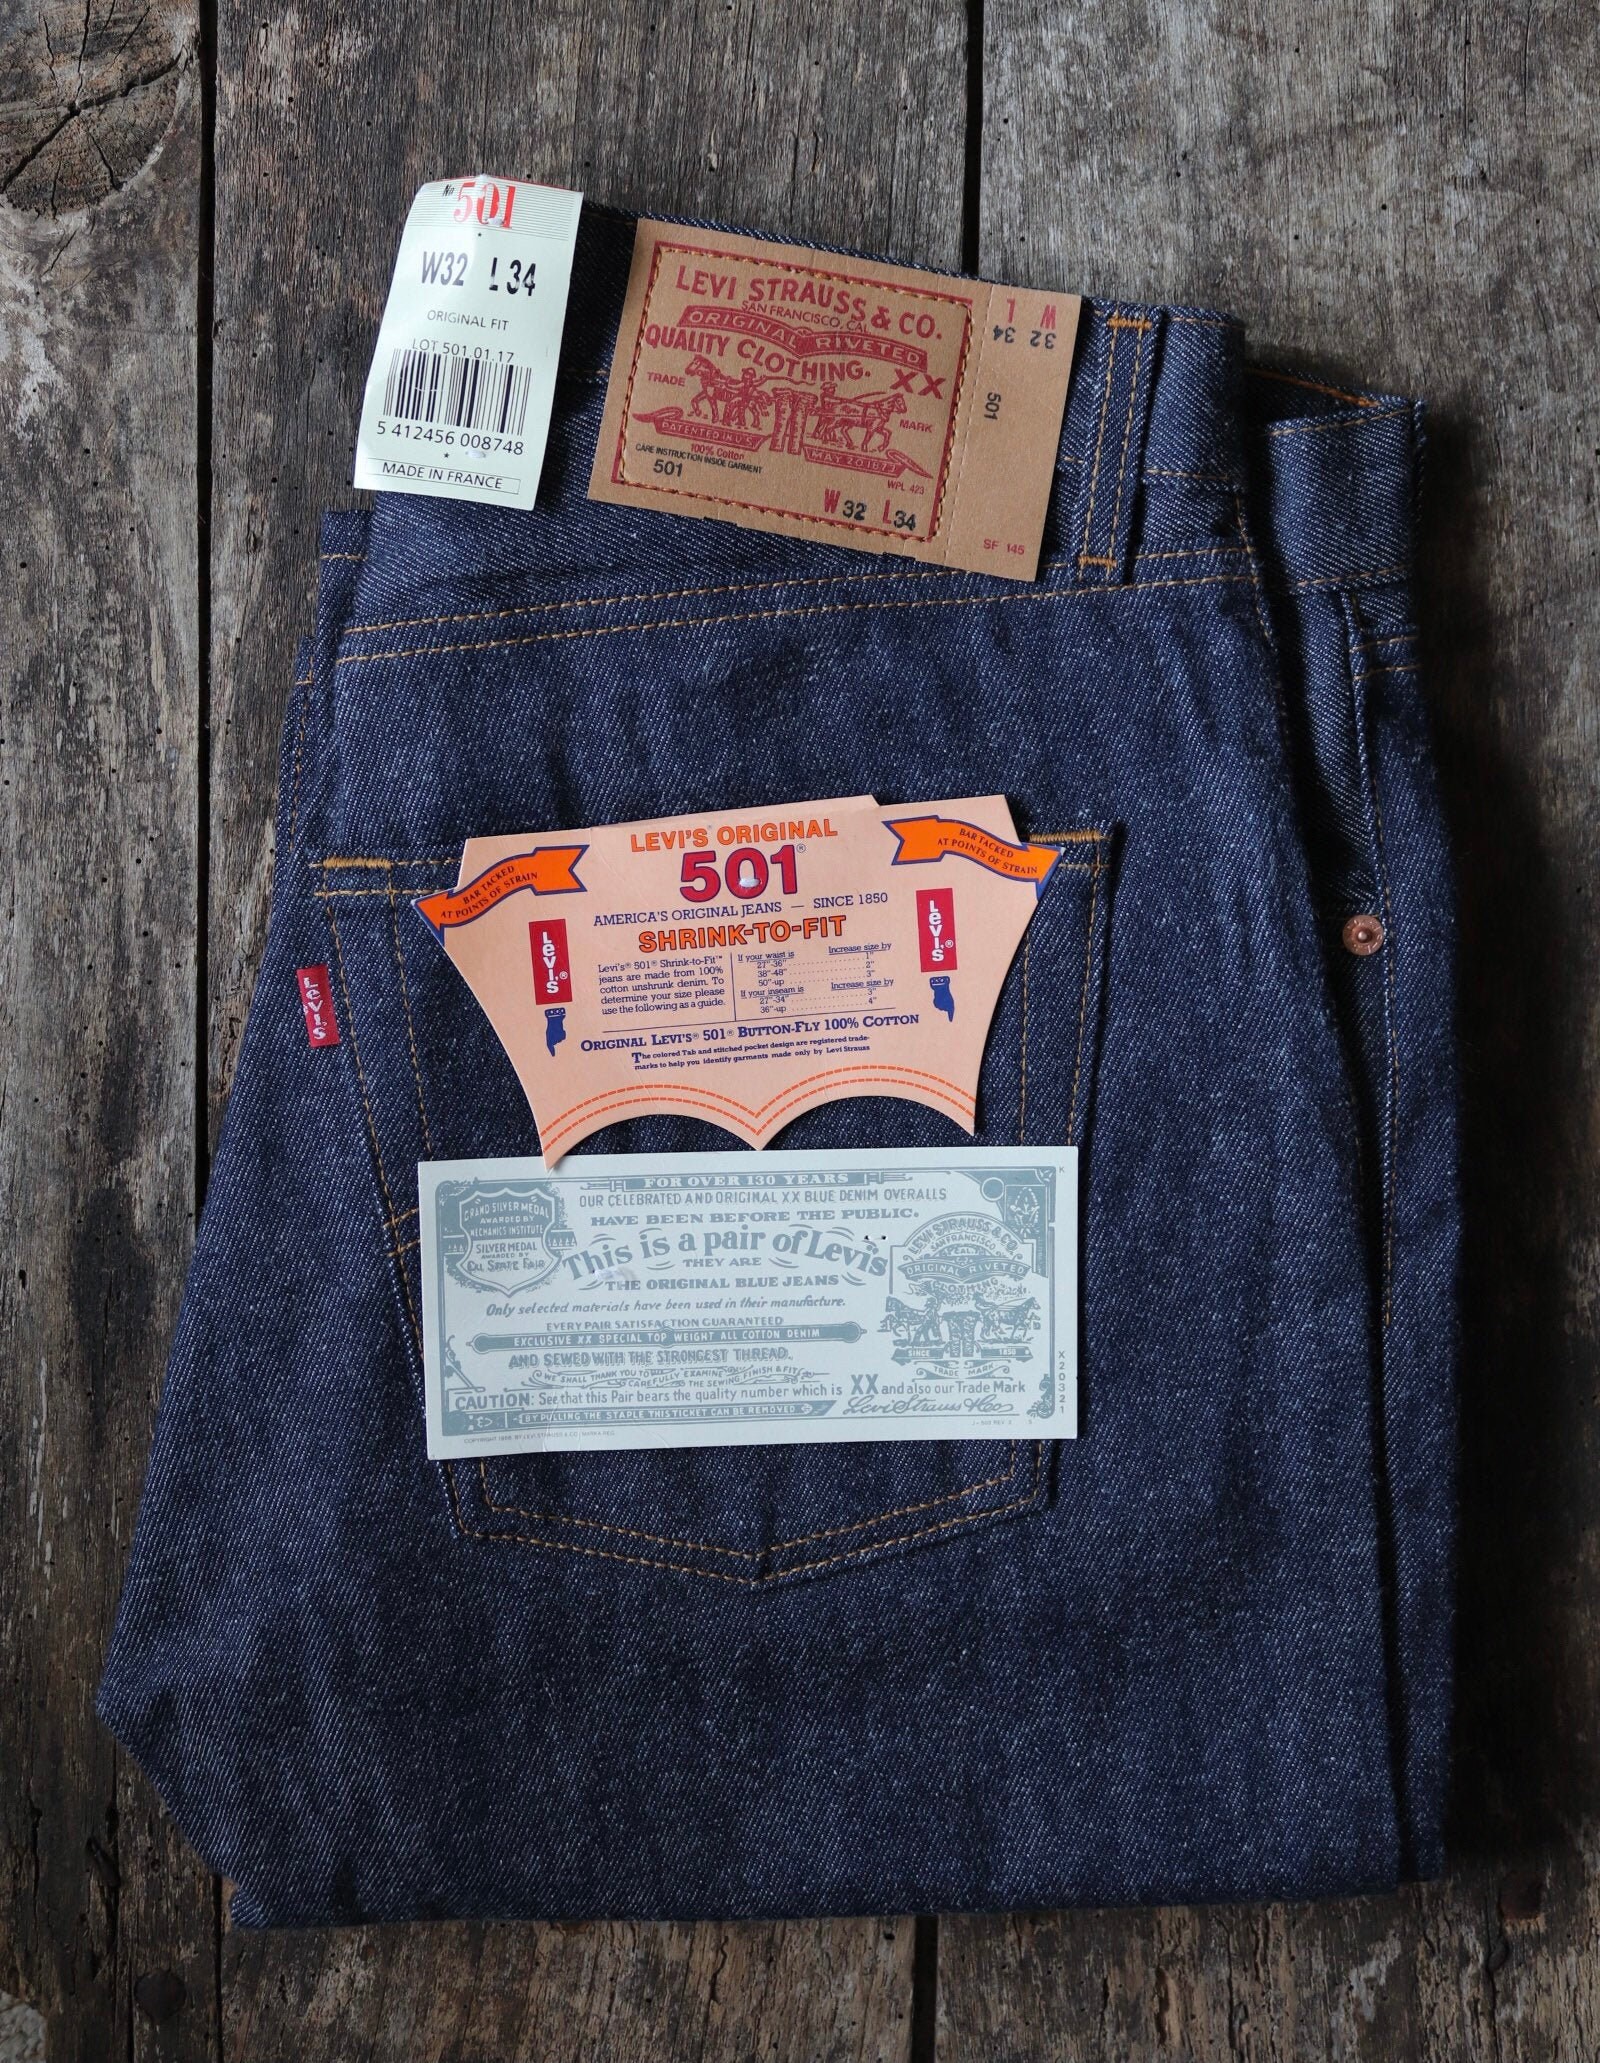 Vintage 1990s 90s deadstock Levis Levi Strauss 501 indigo denim jeans small  e red tab 32” x 34” shrink to fit